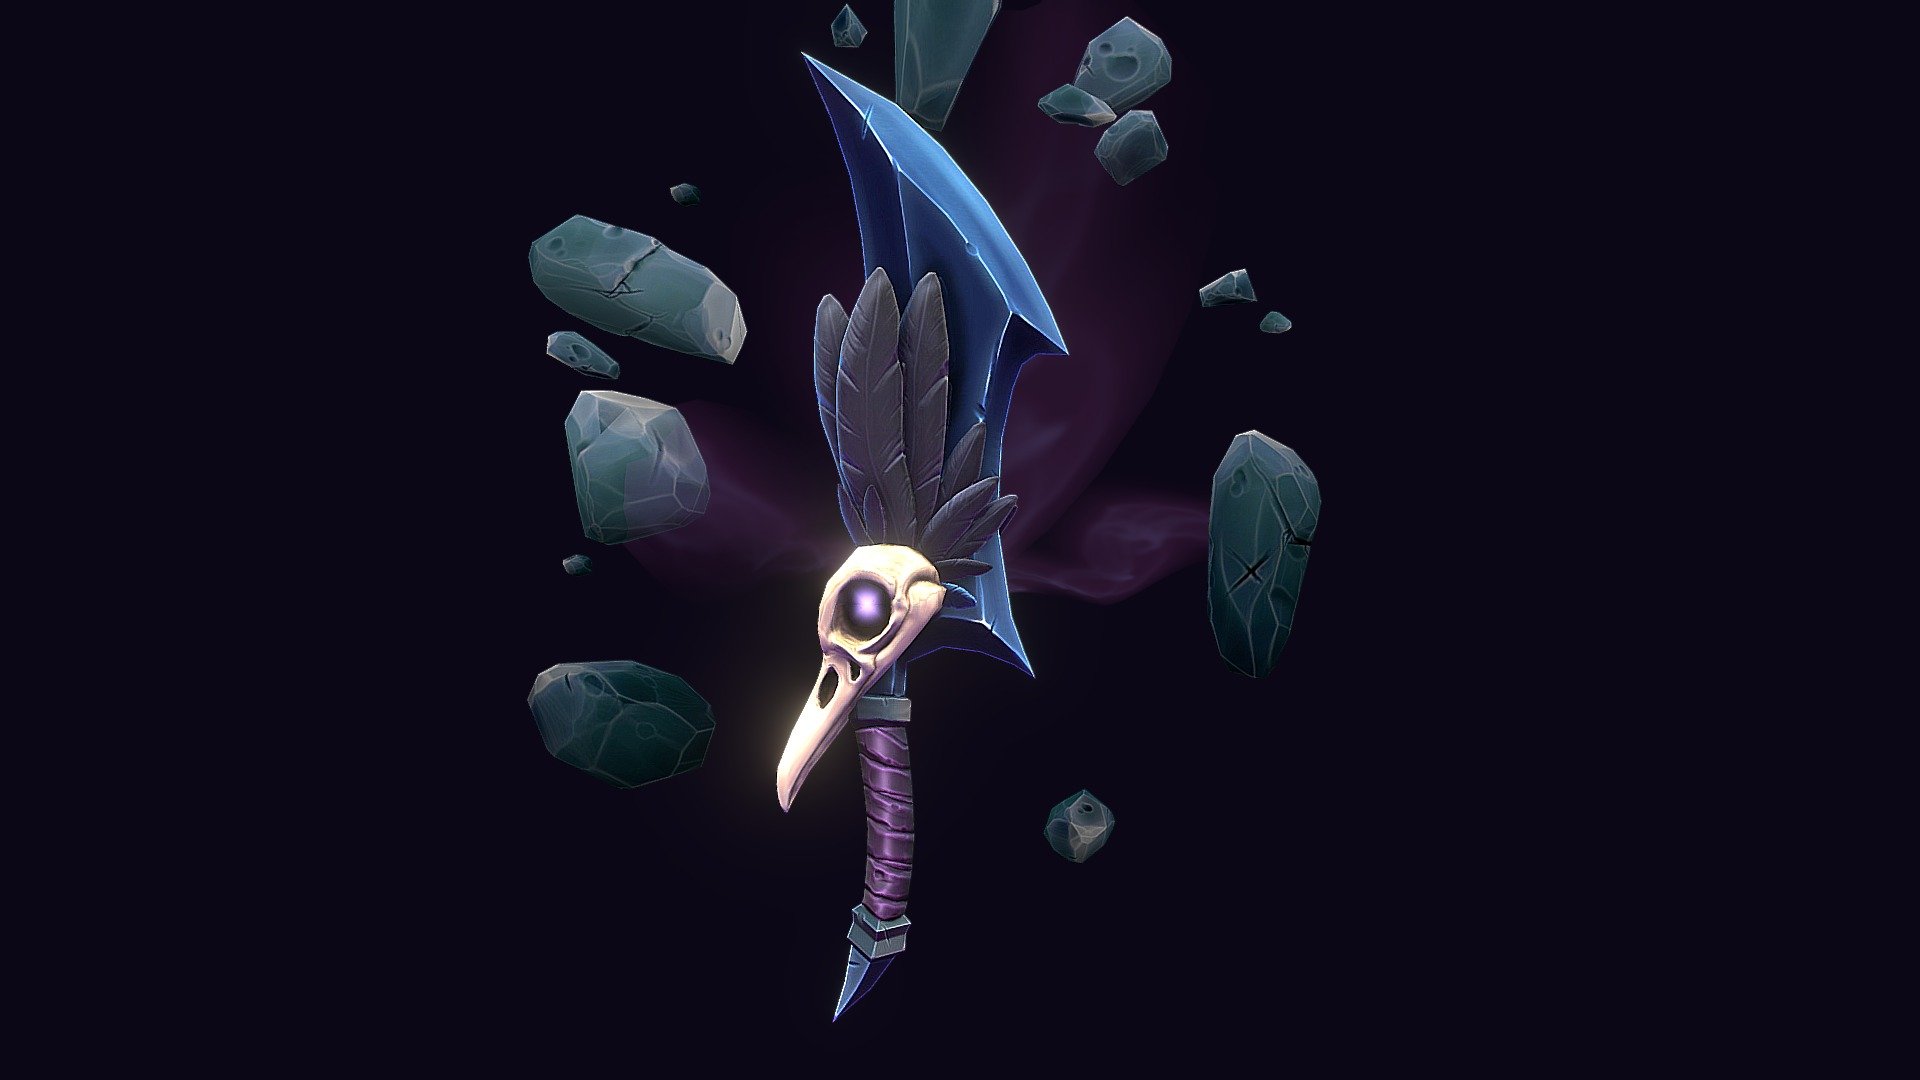 Hi everyone! New stylized asset game-ready. Modeled in Blender and texture in Substance. #b3d - Raven Dagger - Asset Weapon - 3D model by amunozs (@adrian.sierra92) 3d model